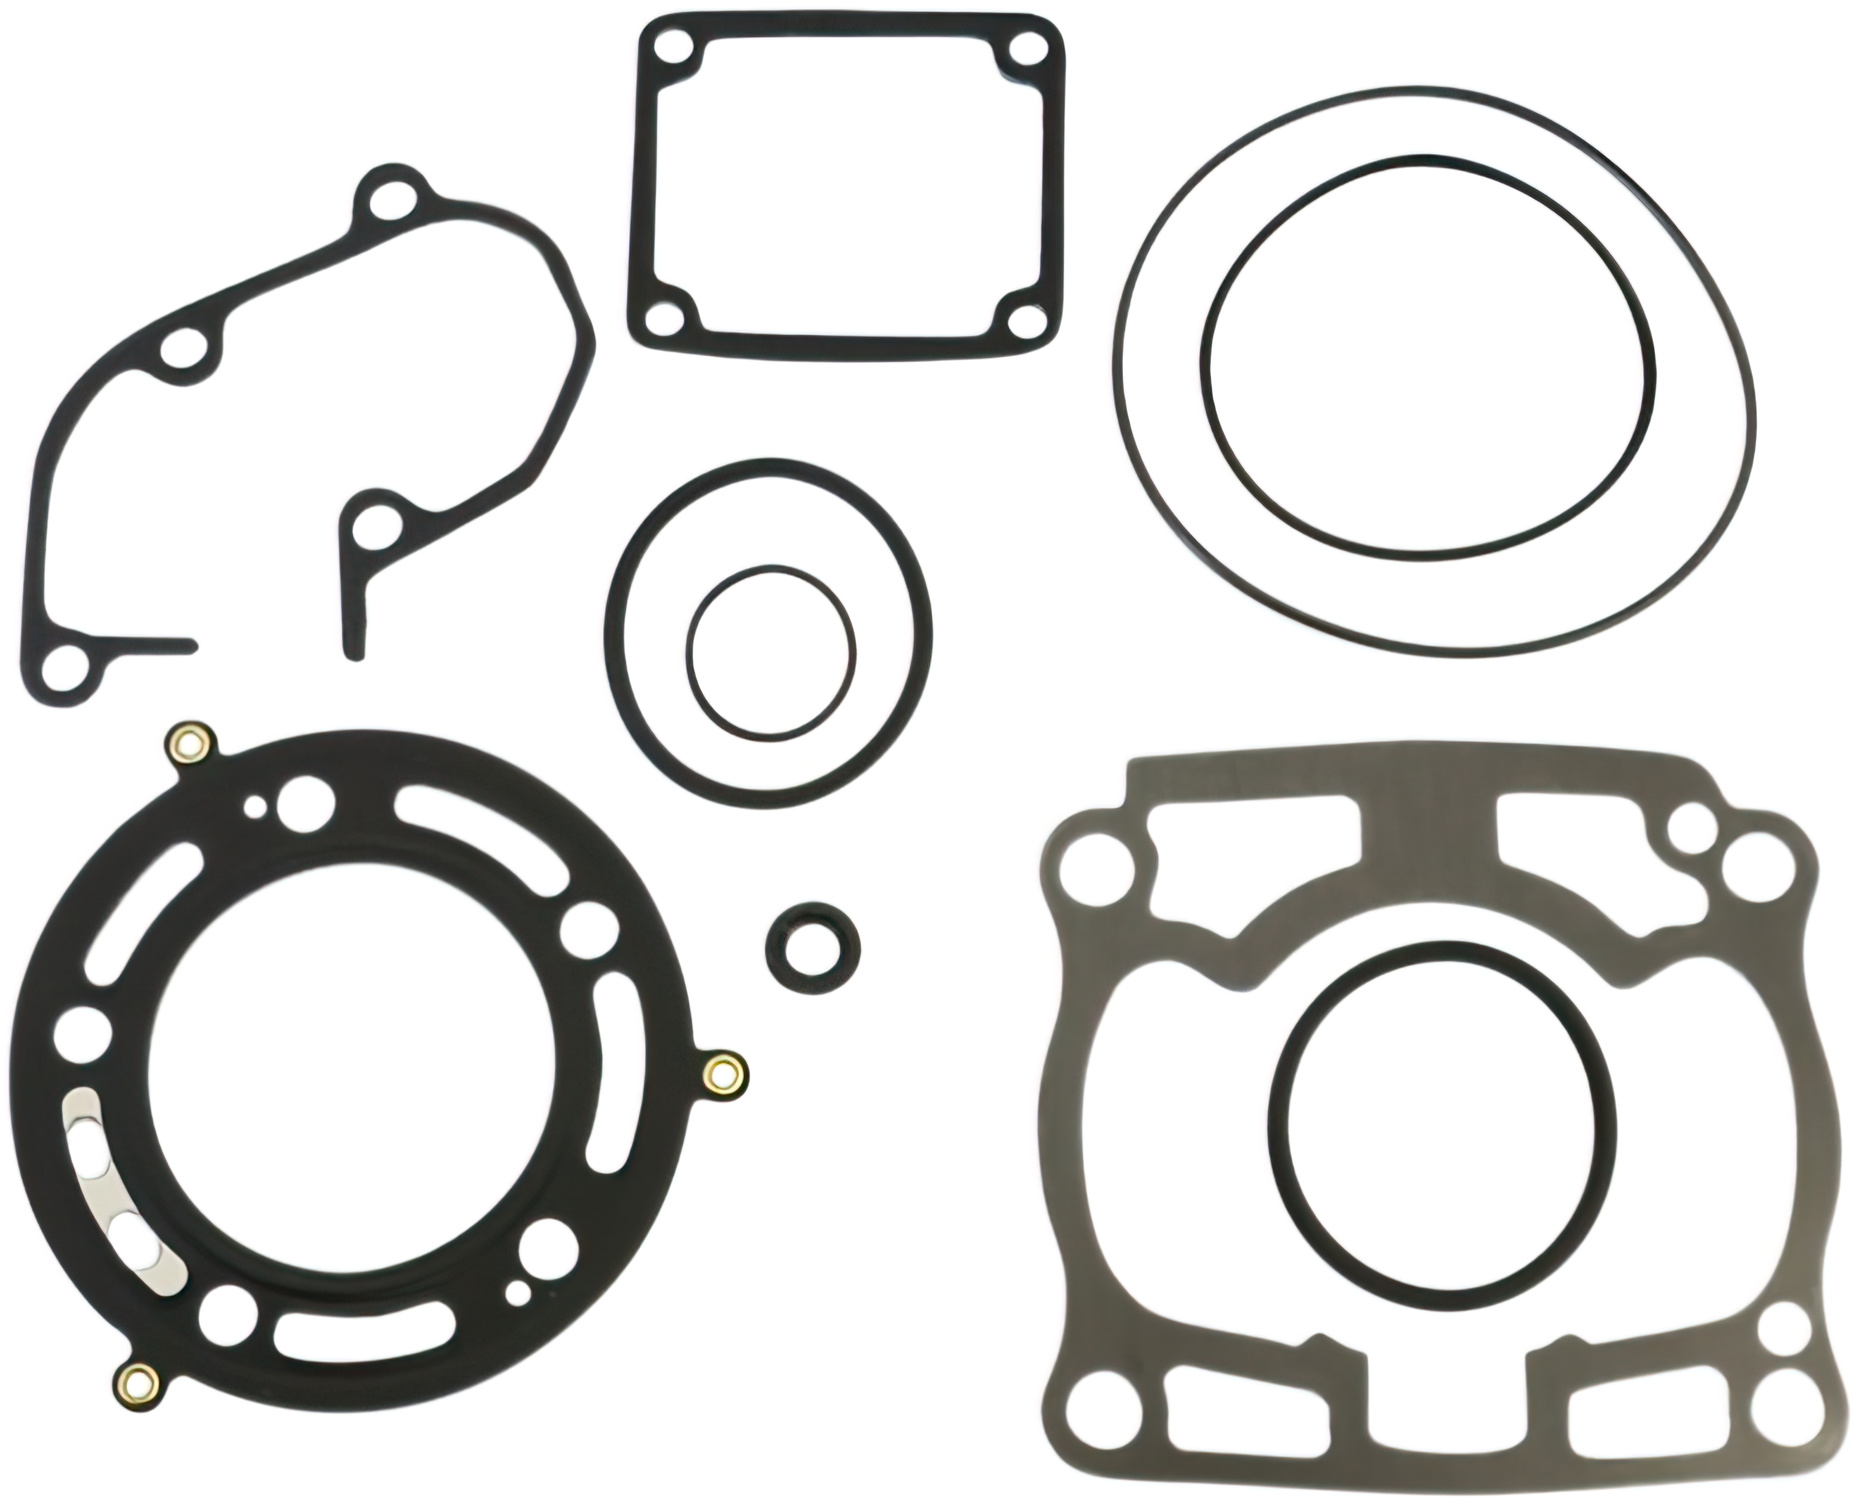 Cylinder Gasket Set for Athena Big Bore KX 125 MAXISCOOT